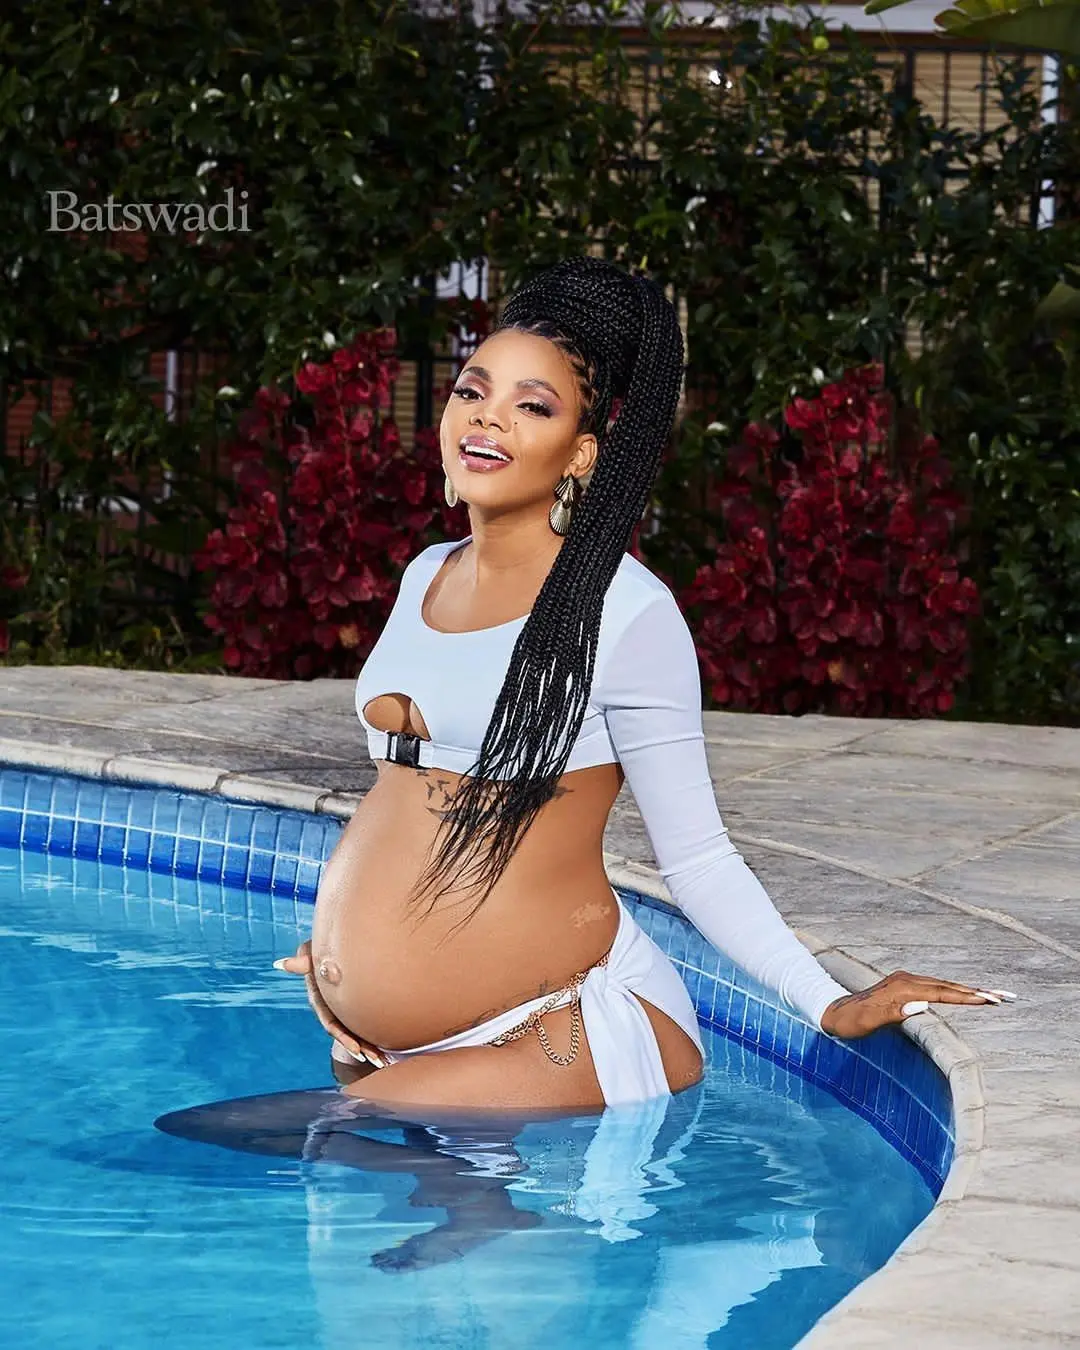 Londie London shows off her baby bump on Batswadi Magazine cover